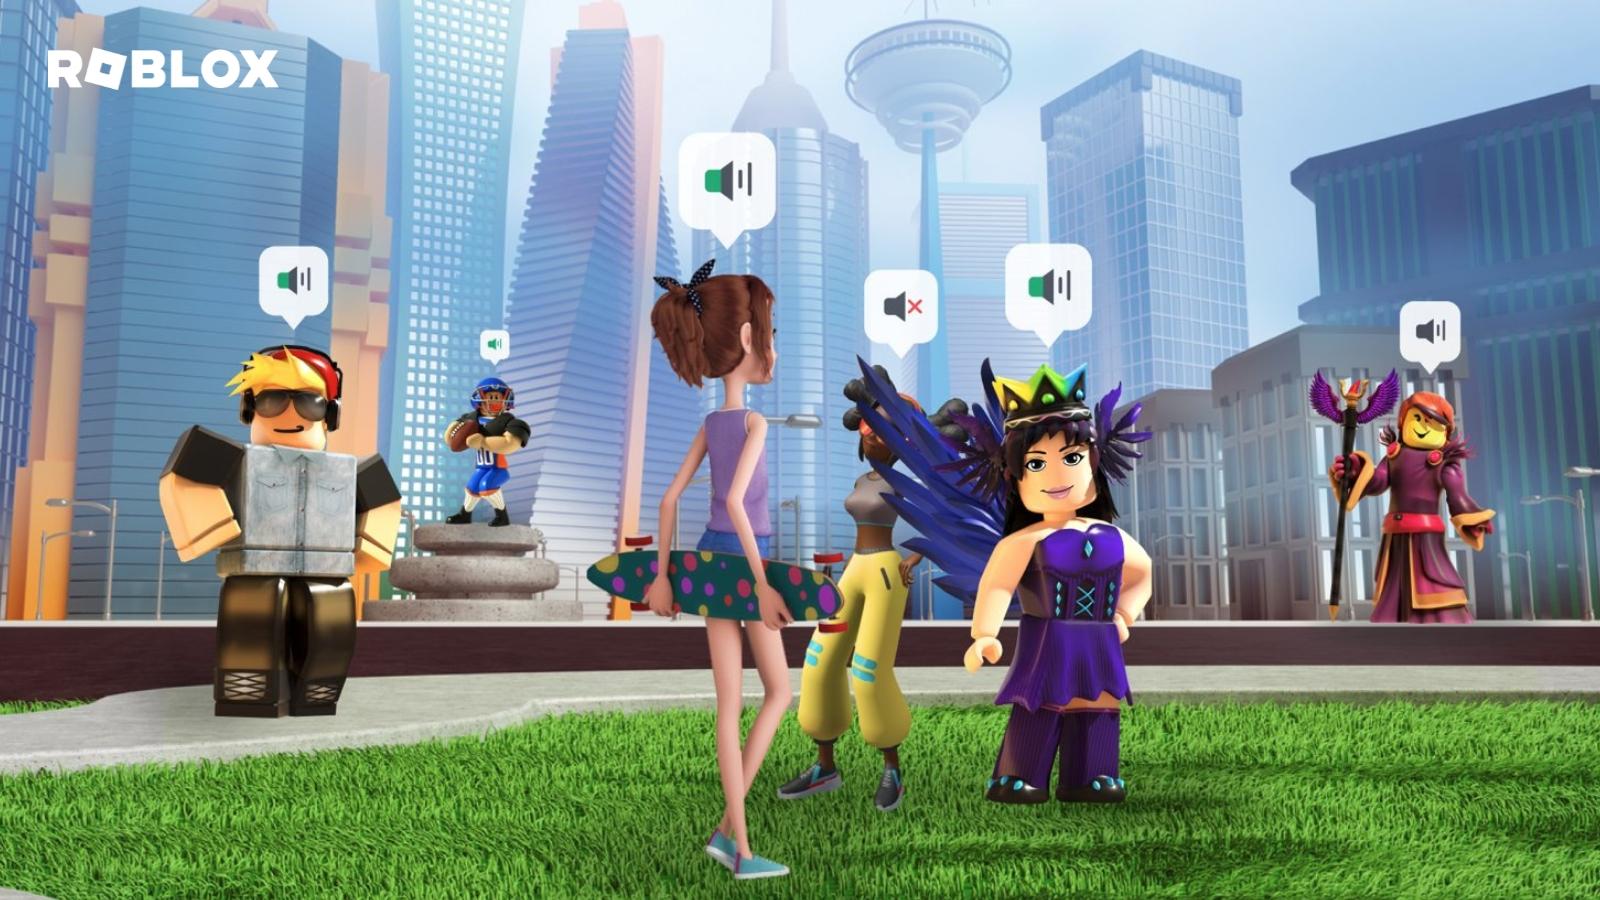 Roblox is banning players for typing “W” and they're furious about